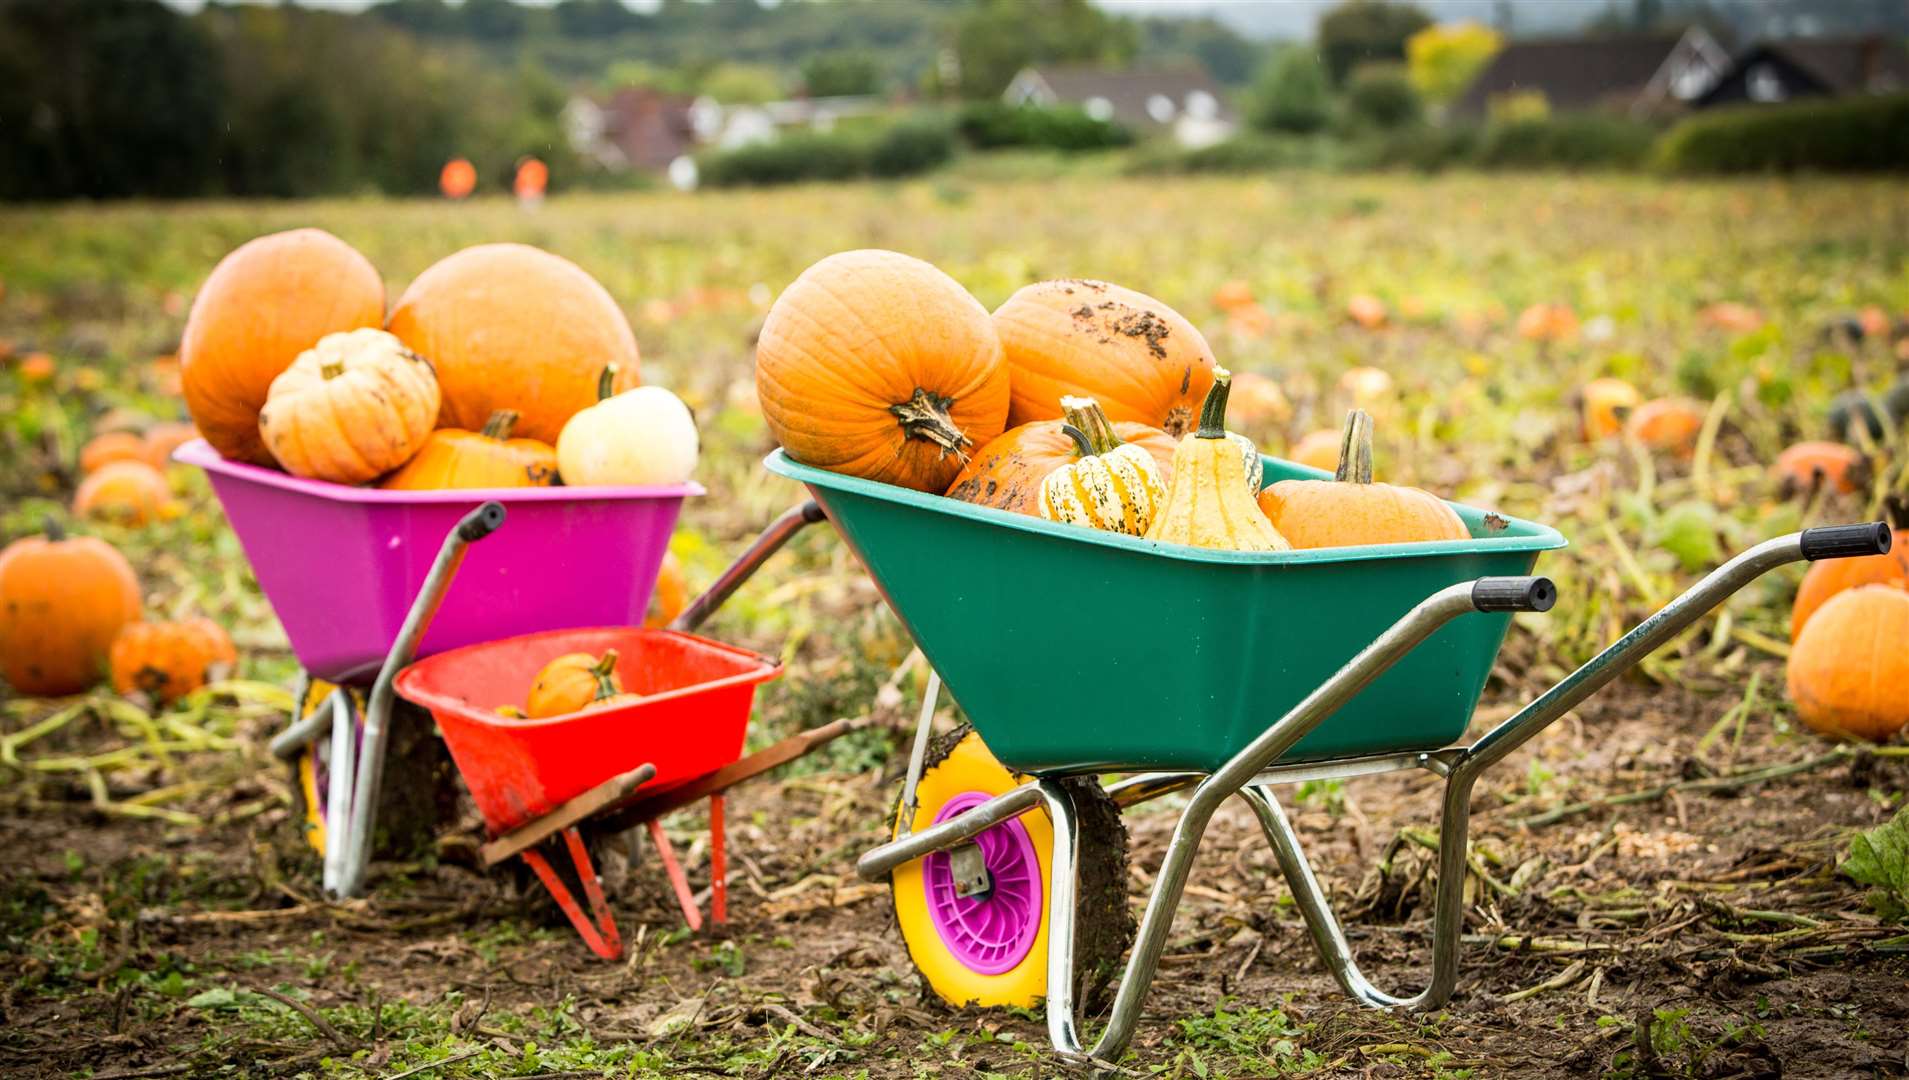 Make sure you take wellies for your pumpkin hunting